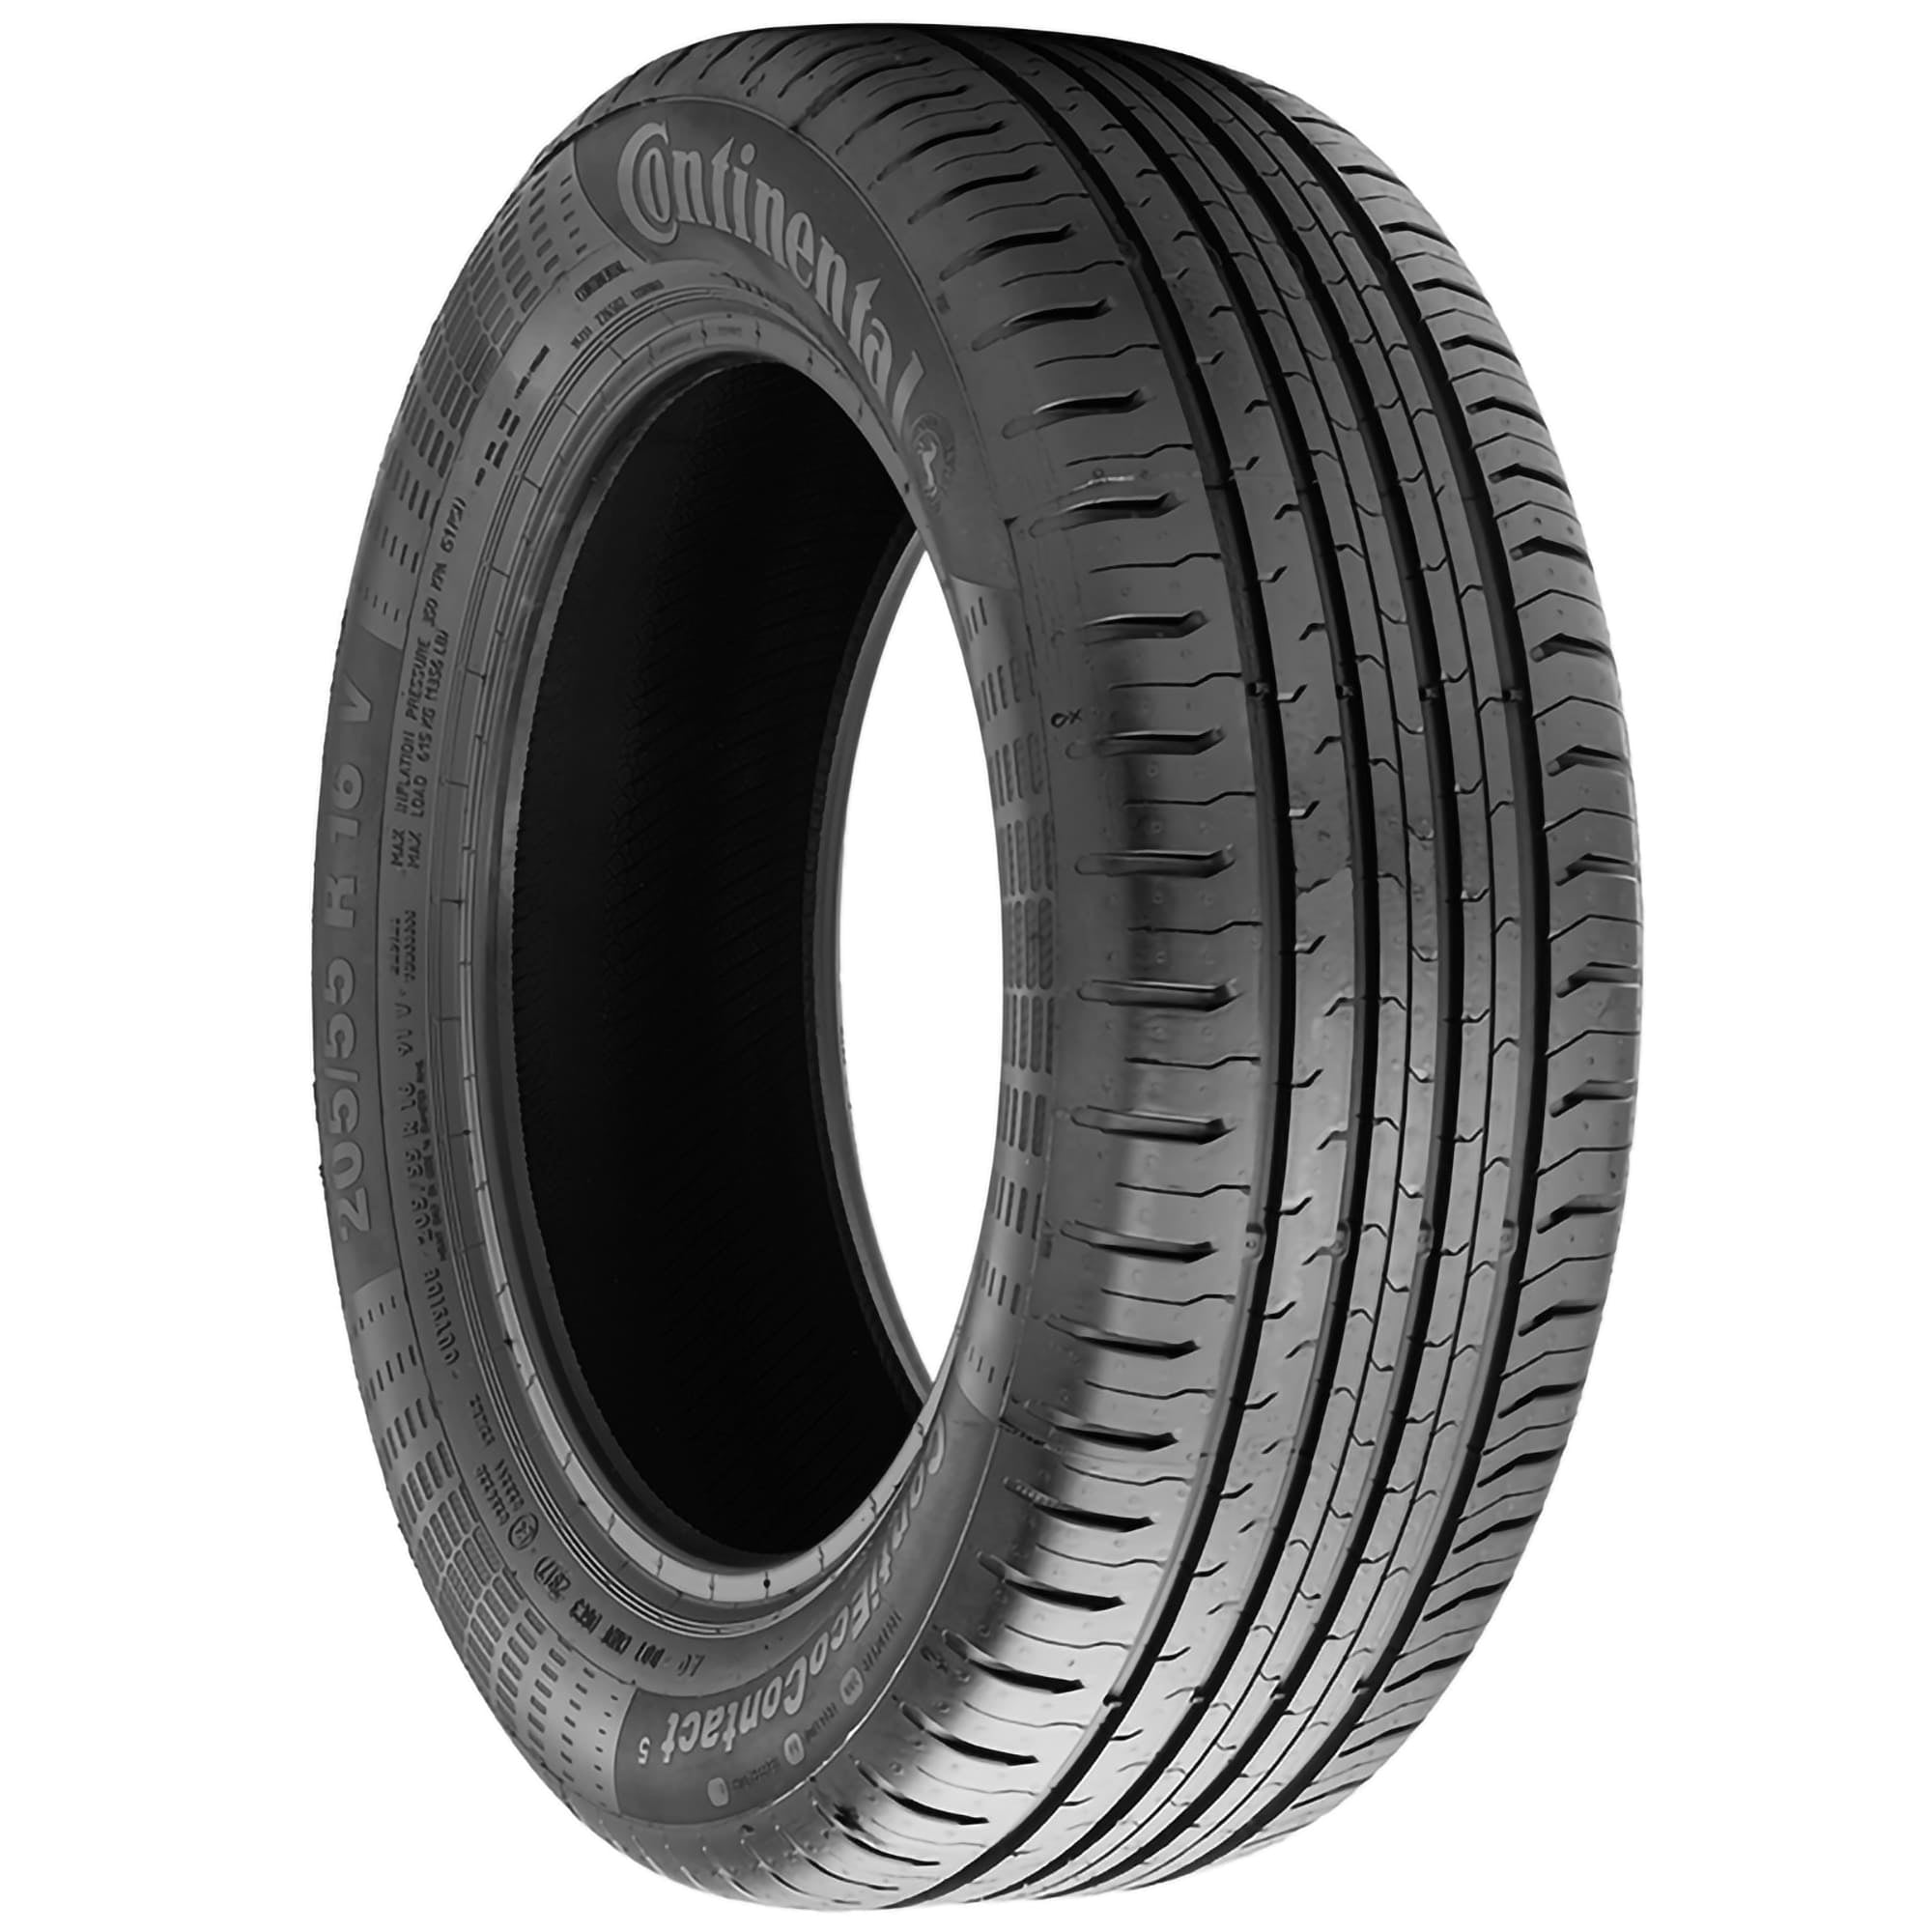 Continental ContiSportContact 5 Summer 225/45R17 91Y Passenger Tire